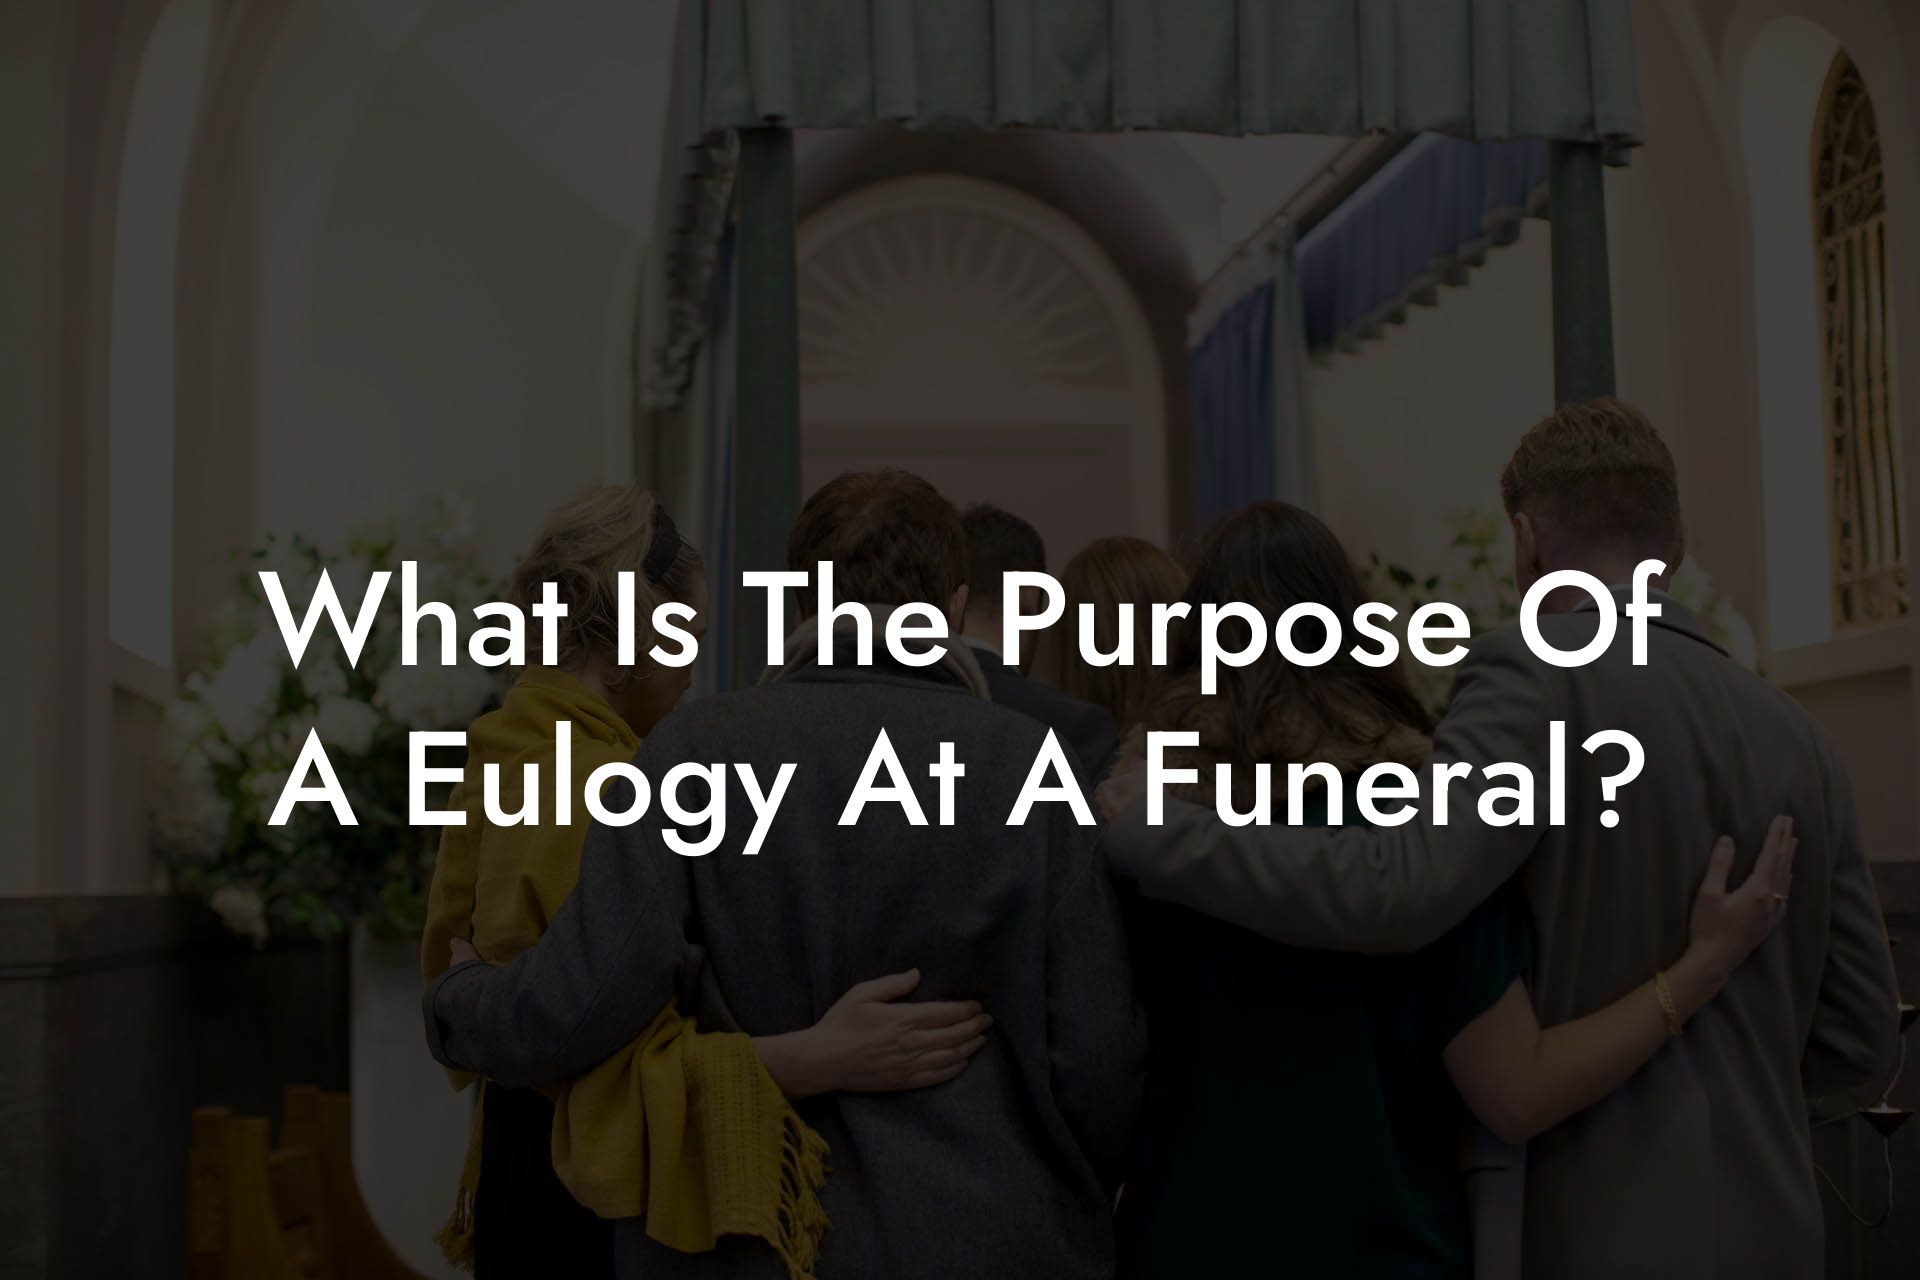 What Is The Purpose Of A Eulogy At A Funeral?